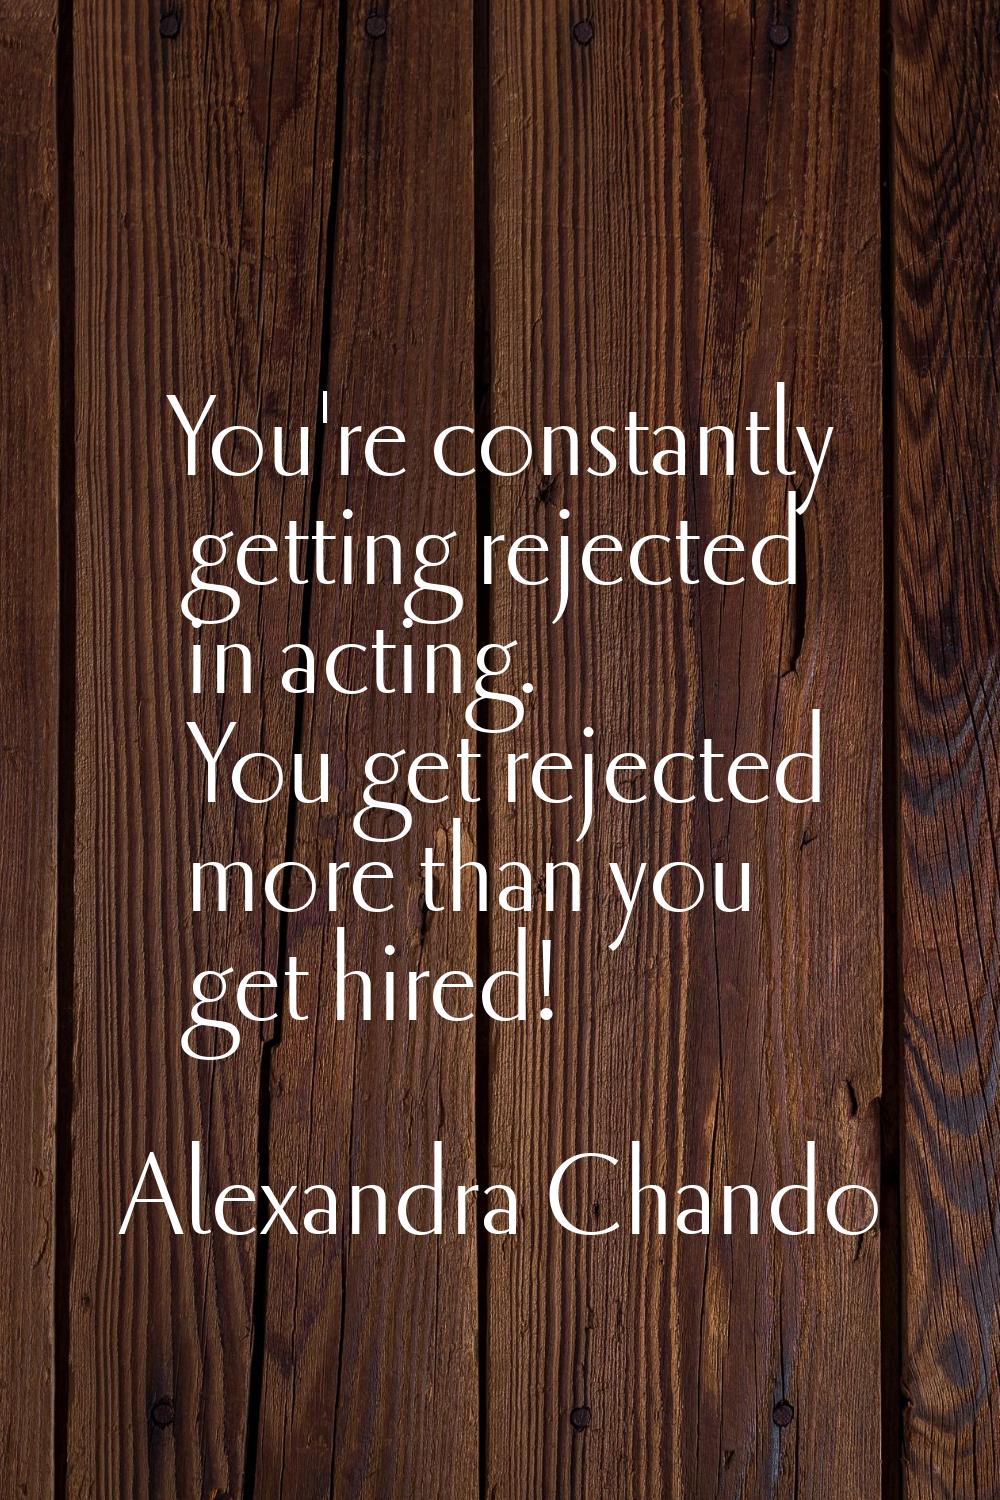 You're constantly getting rejected in acting. You get rejected more than you get hired!